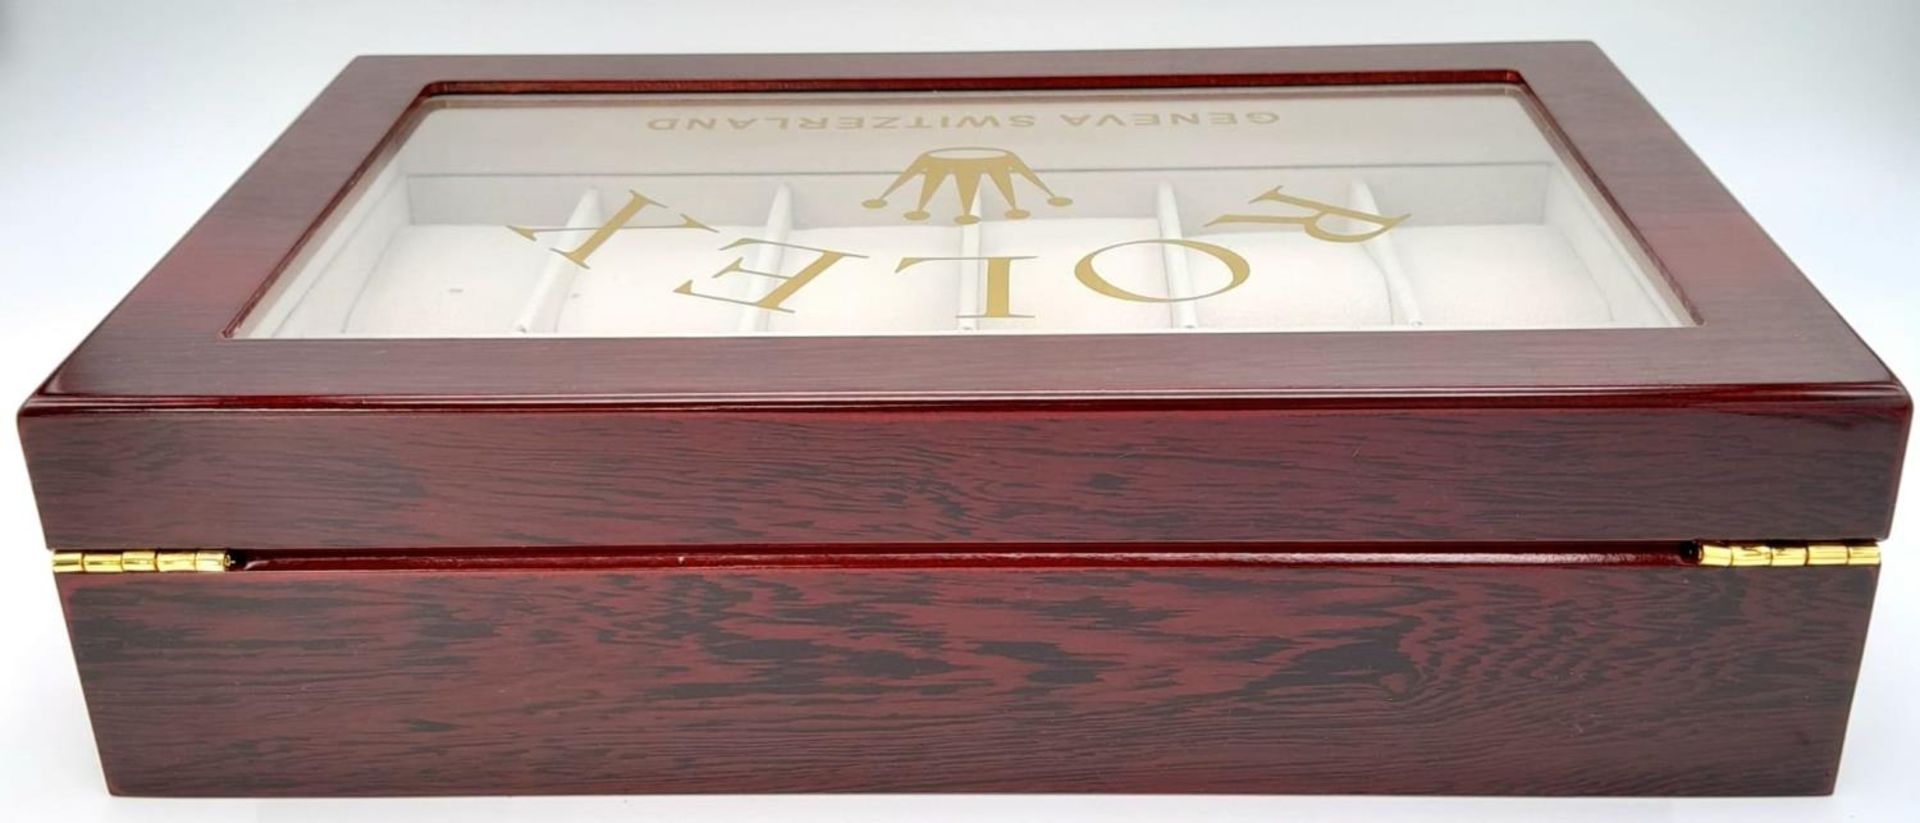 A high-quality ROLEX wooden watch case for 12 watches, made from high gloss cherry veneer and - Image 6 of 7